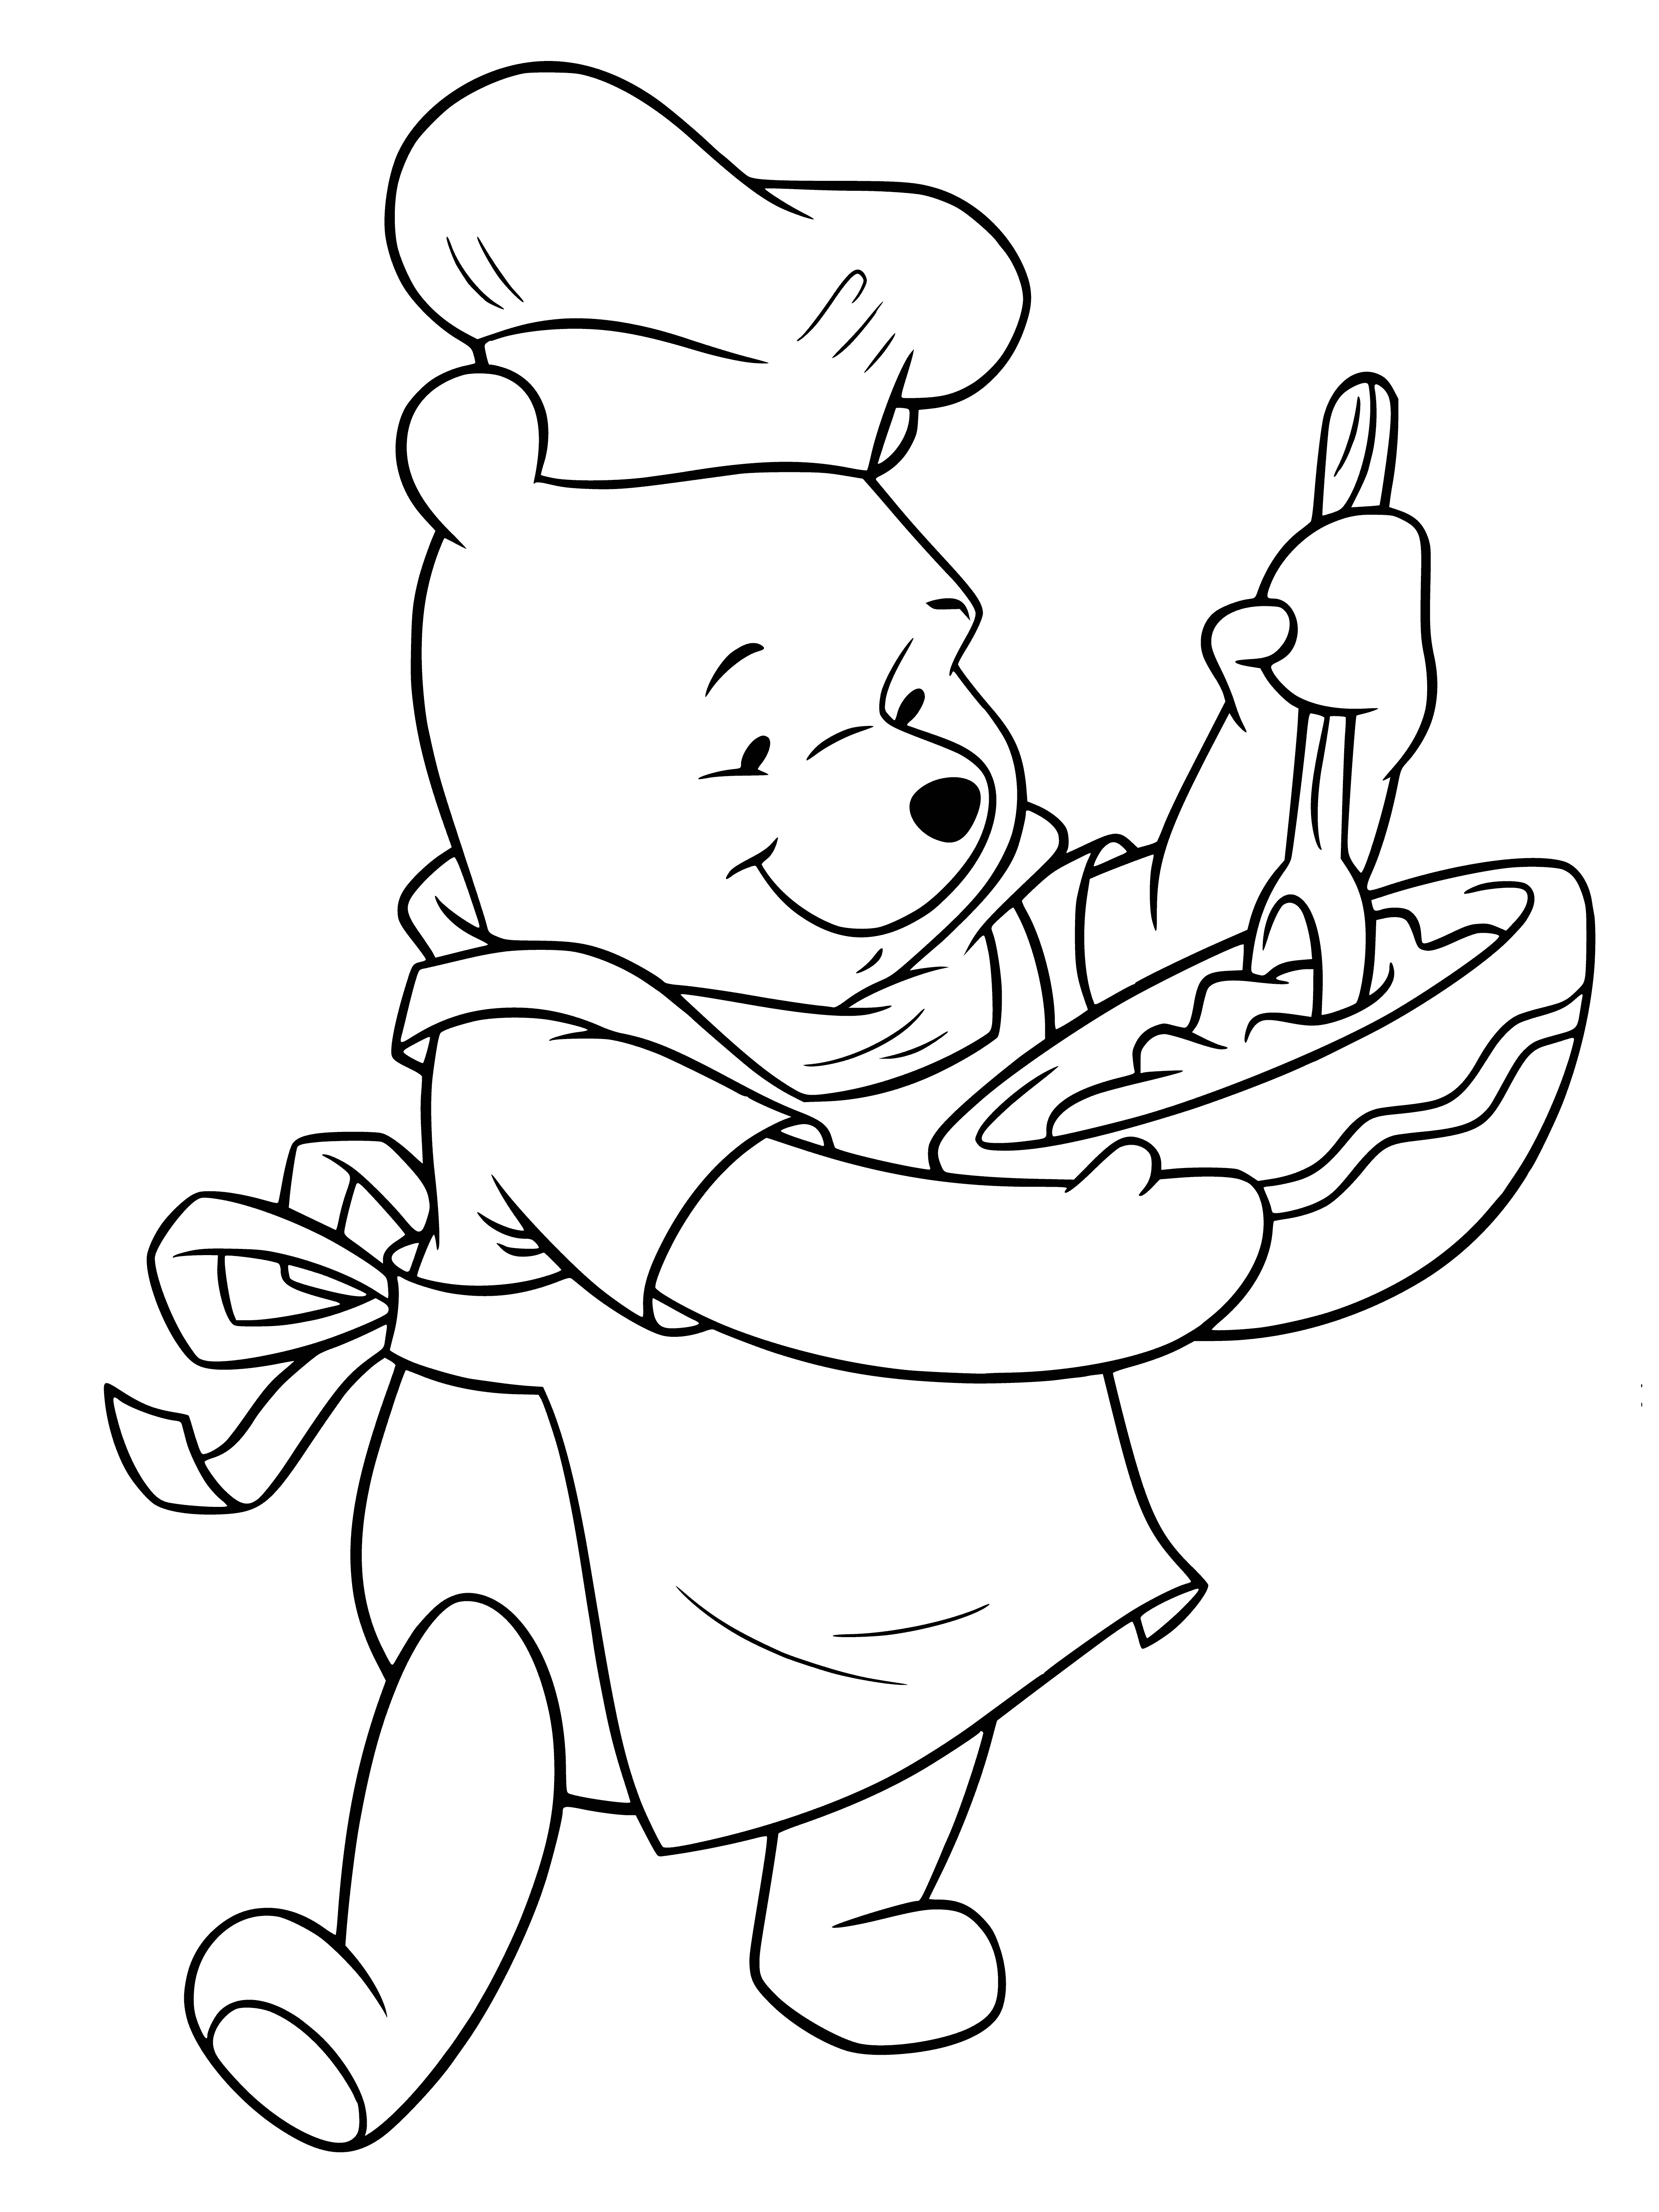 coloring page: Winnie the Pooh cooking in the kitchen with a cookbook & spoon - steam coming out of pot! #disney #fun